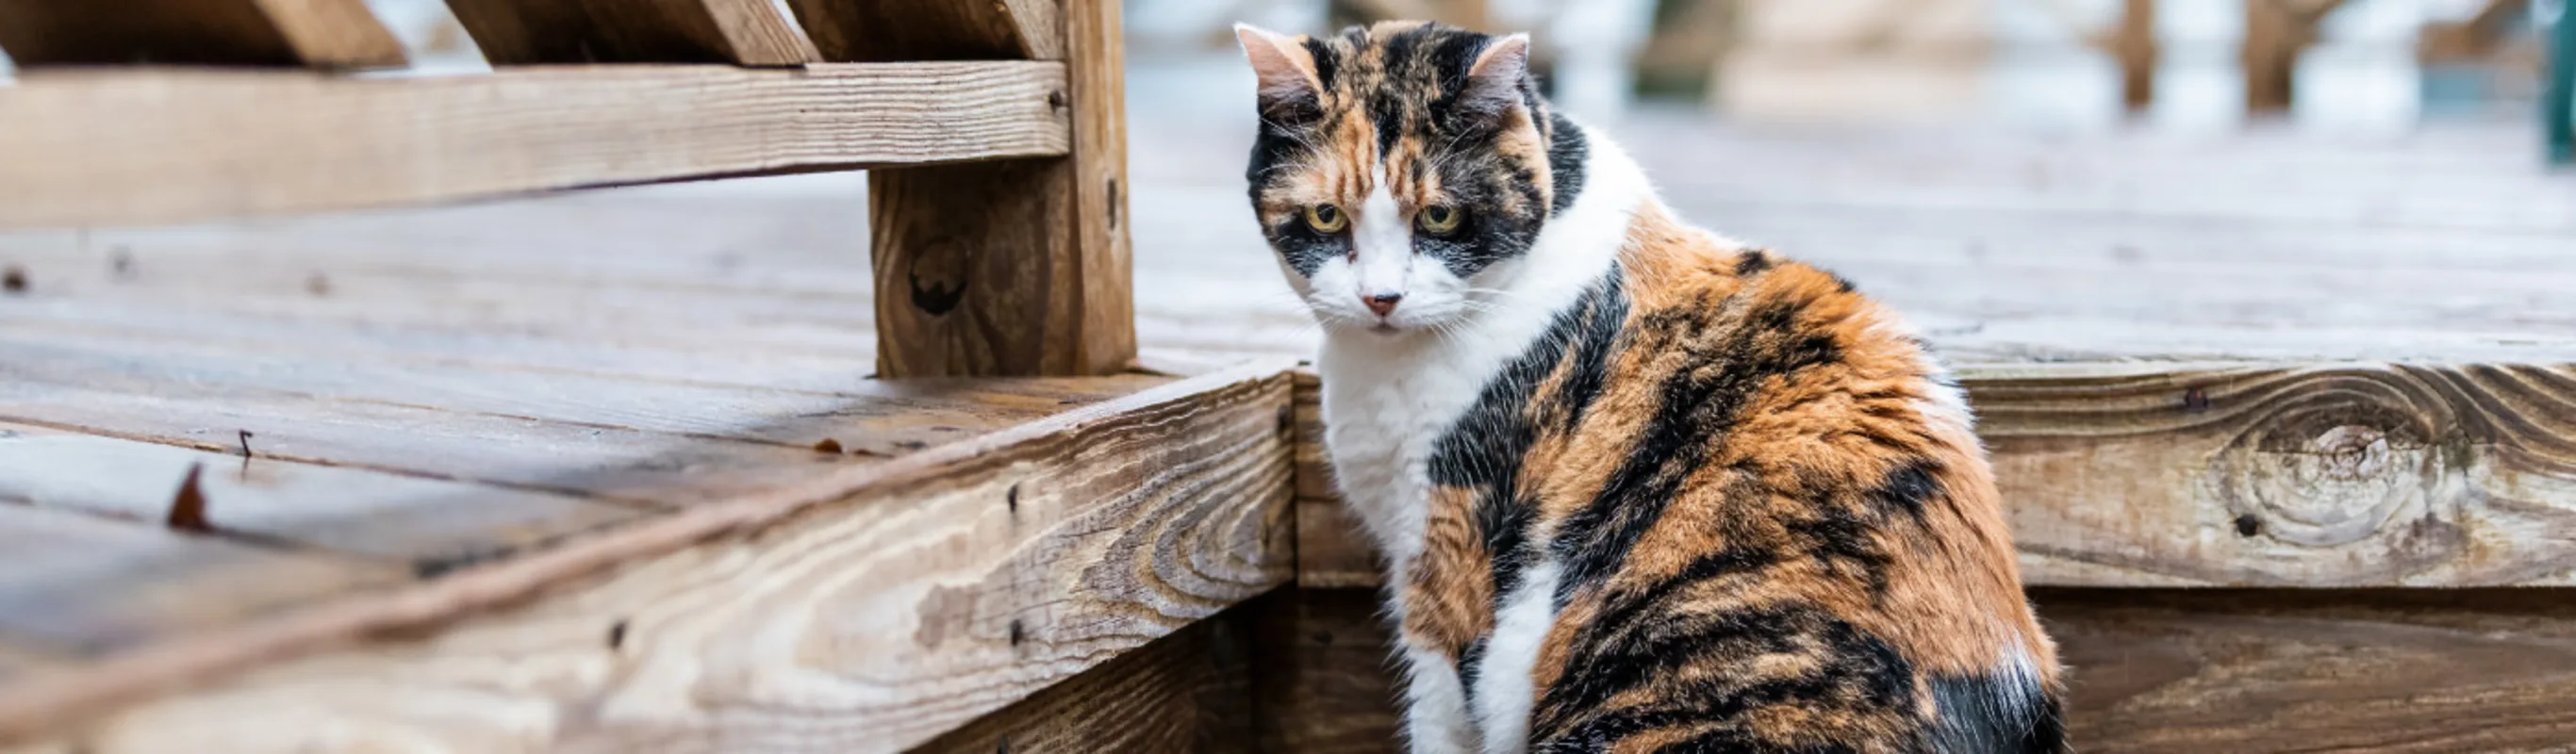 Calico cat sitting on wooden steps of an outdoor patio deck